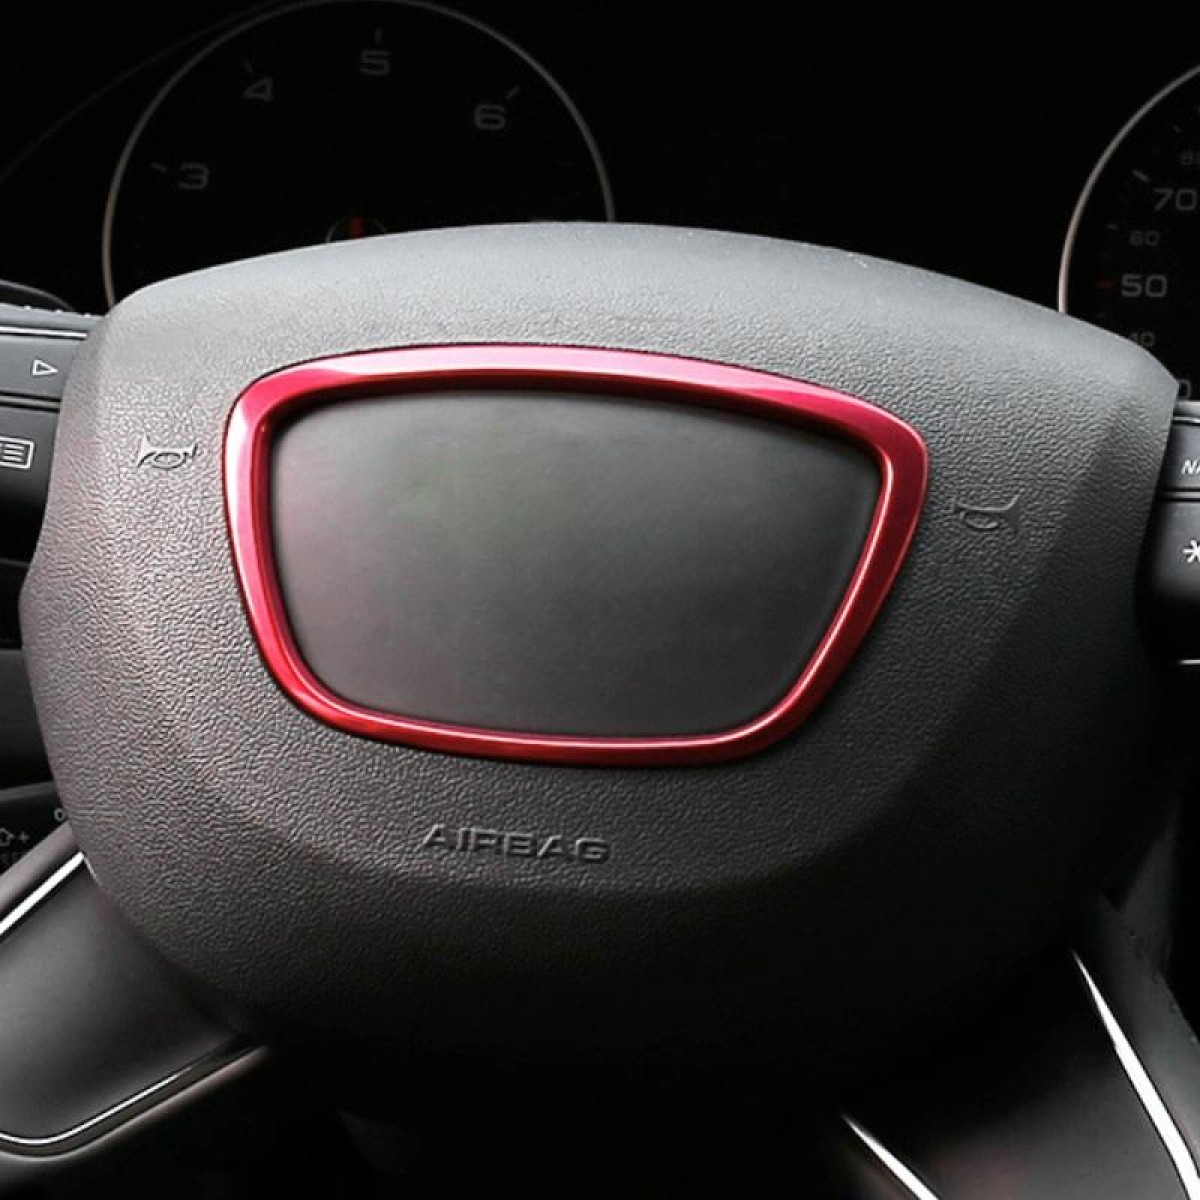 Car Auto Steering Wheel Ring Cover Trim Sticker Decoration for Audi (Red)